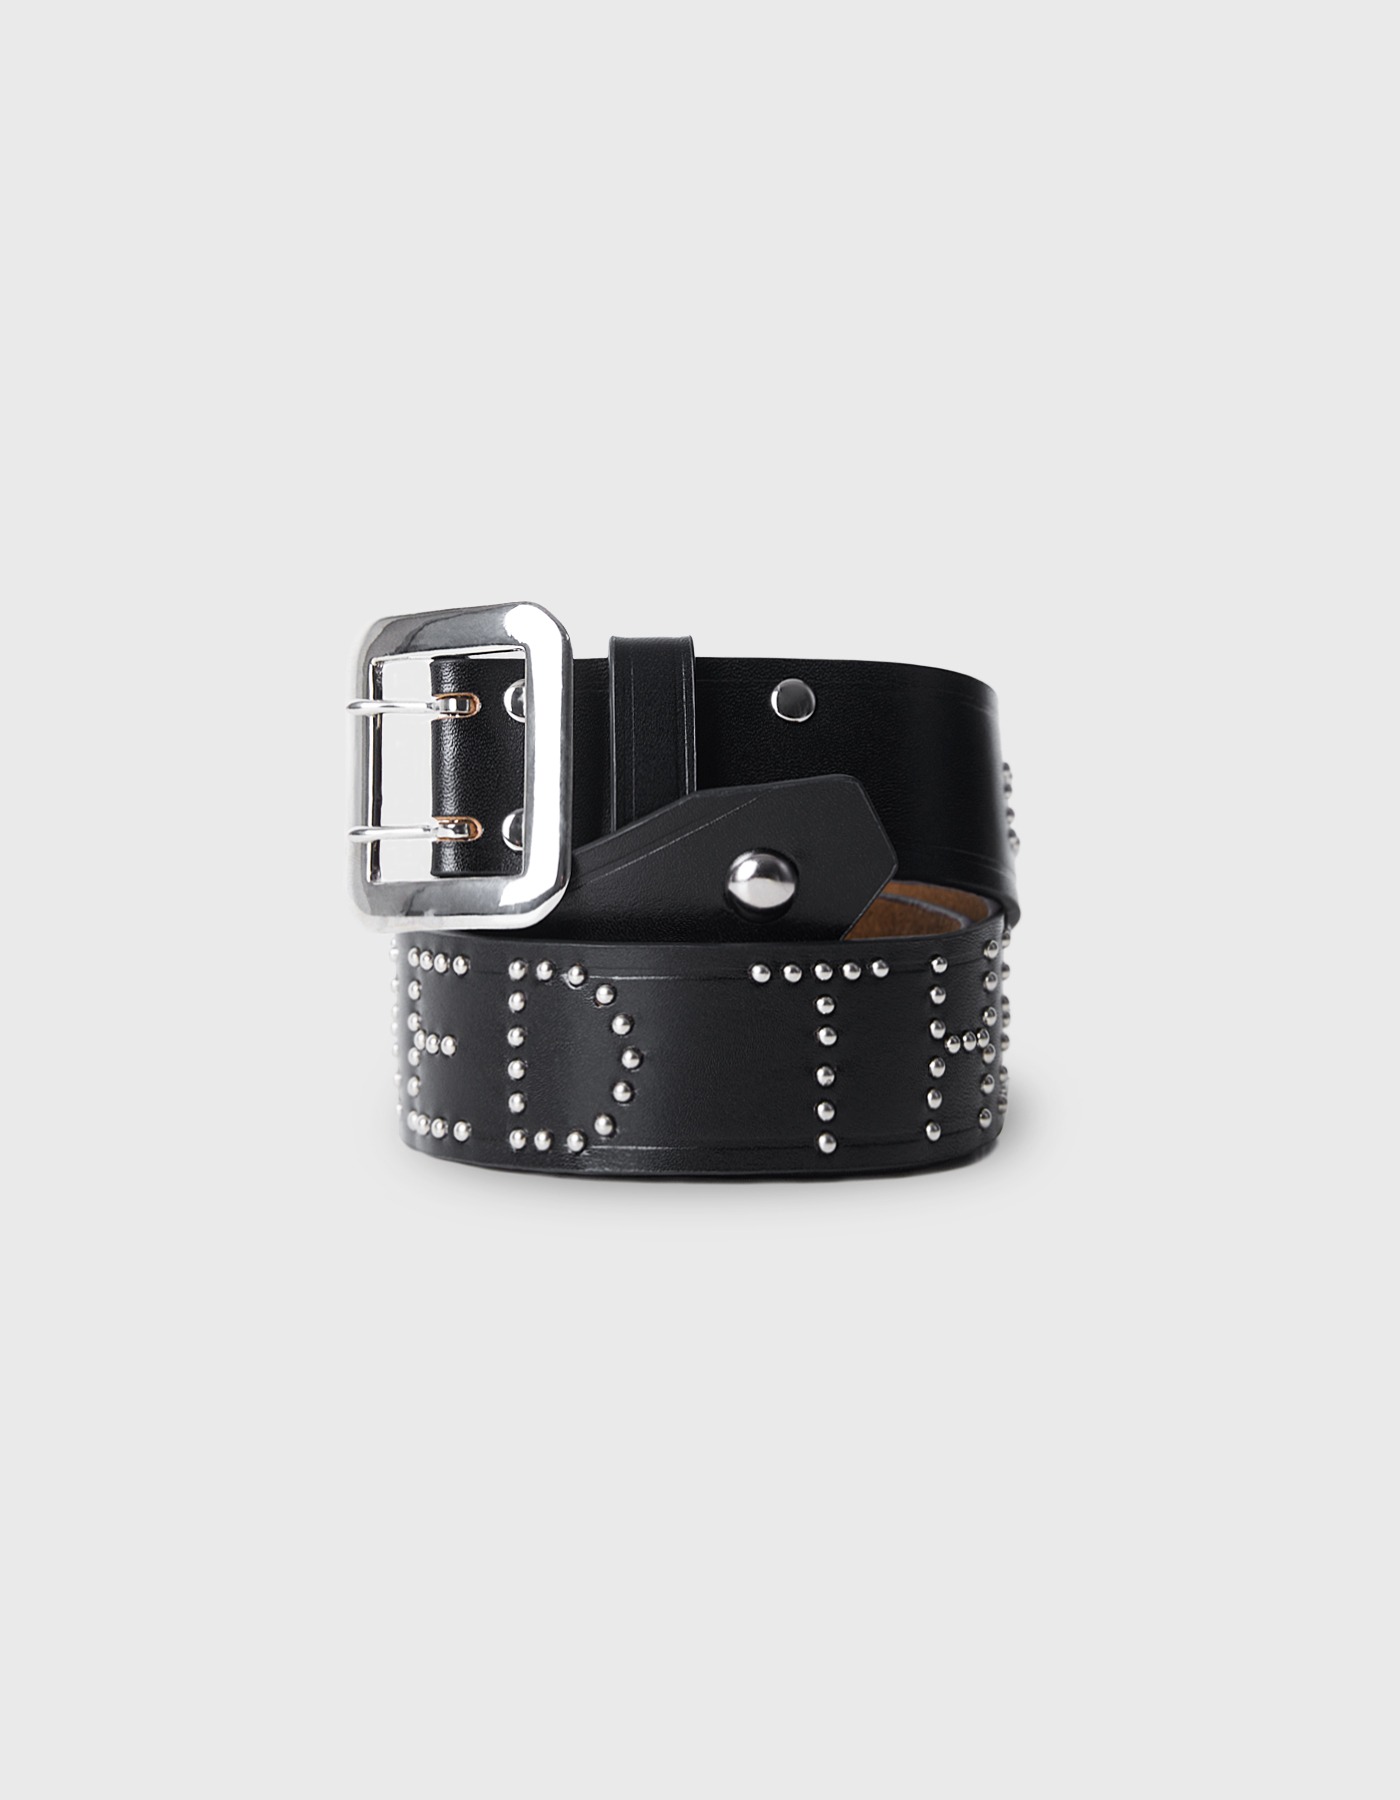 ALFRED THE GREAT LEATHER BELT  / Black